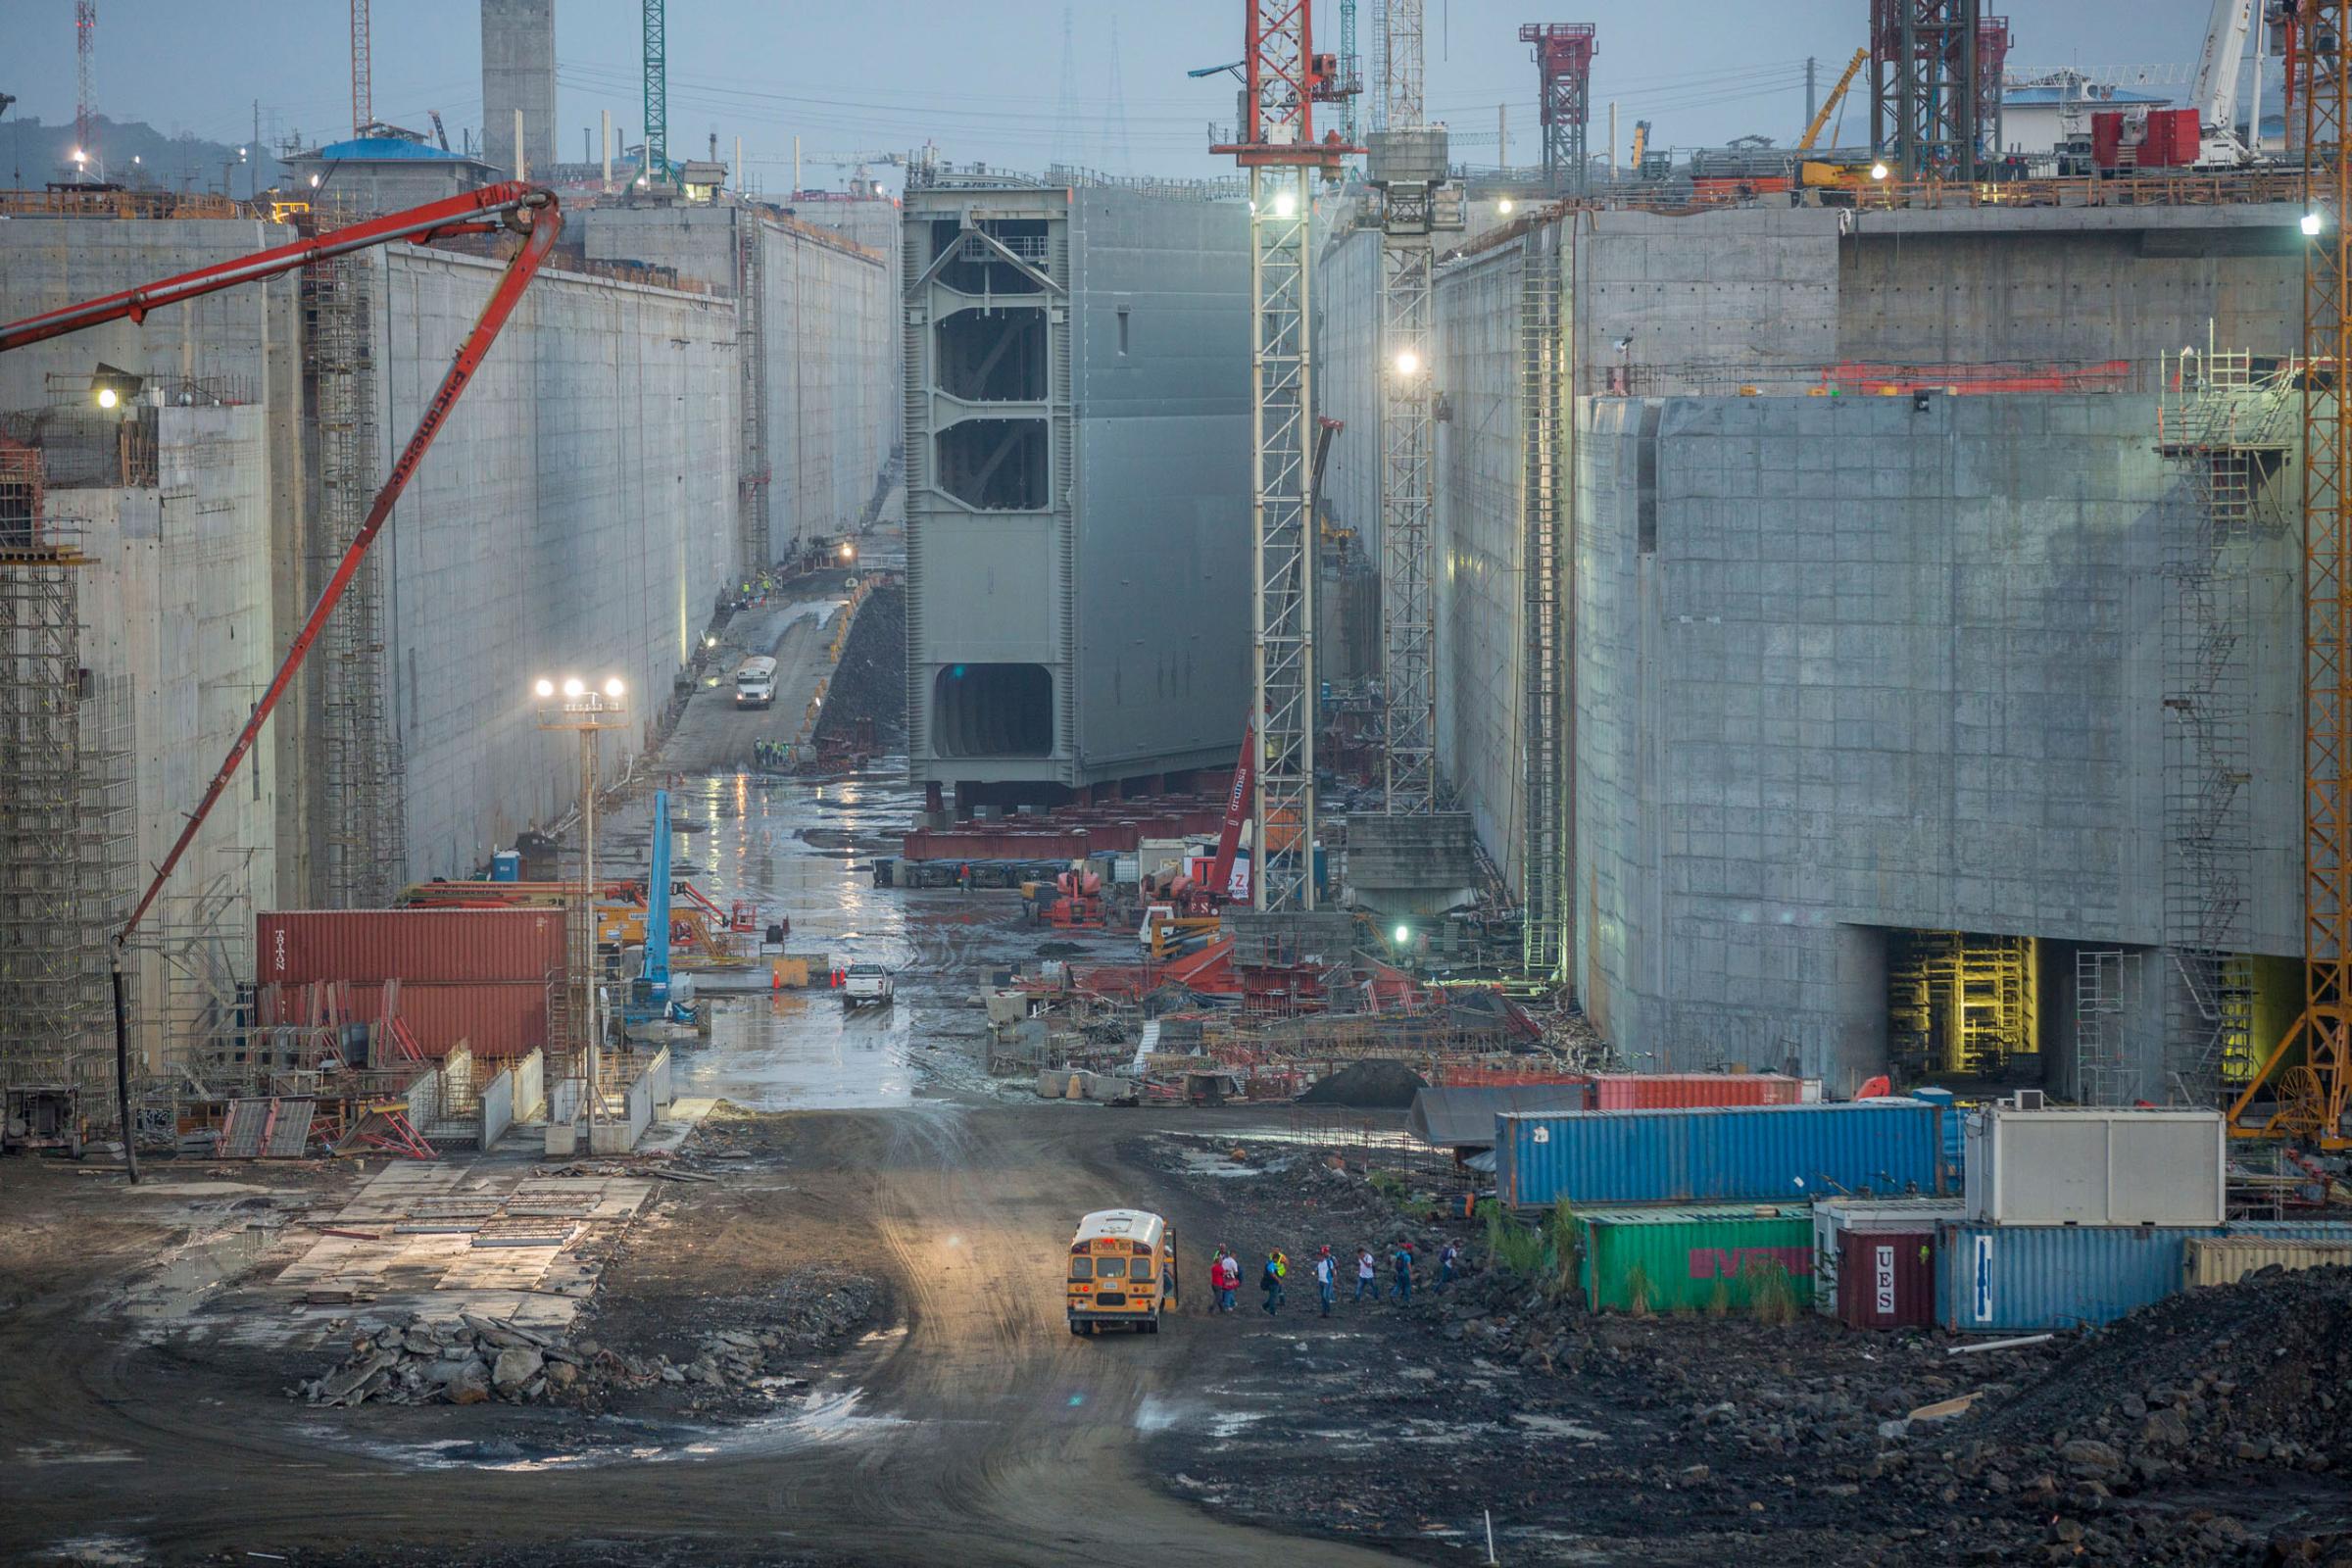 The final  lock gate waits to be installed on the Pacific side of the   Panama Canal Expansion project. April 23, 2015.